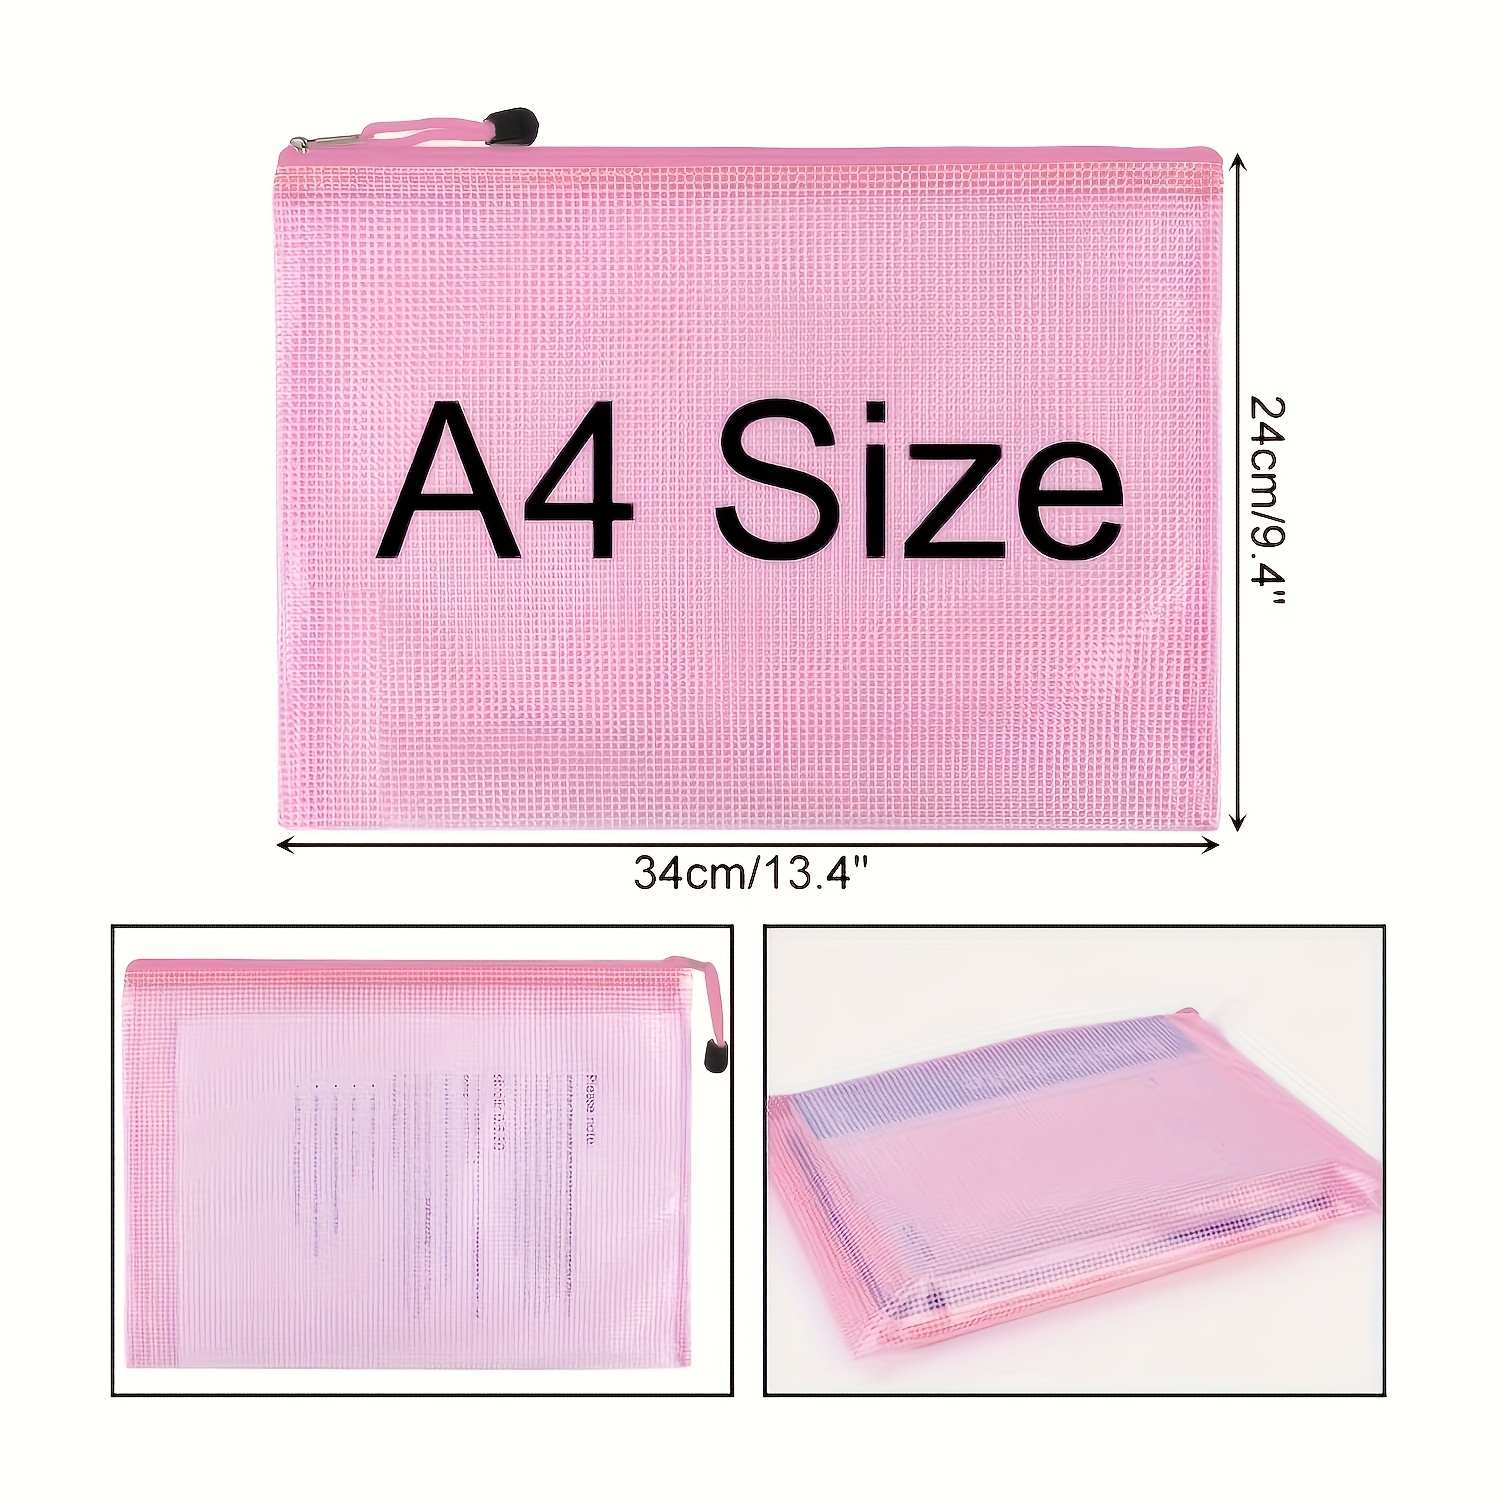 5PCS Zipper Pockets, Zipper File Bags, Cross Stitch And Jigsaw Puzzle  Project Bags For Sorting And Storage, Letter Size A4, Suitable For Travel,  School, Board Games And Office Supplies(A4)